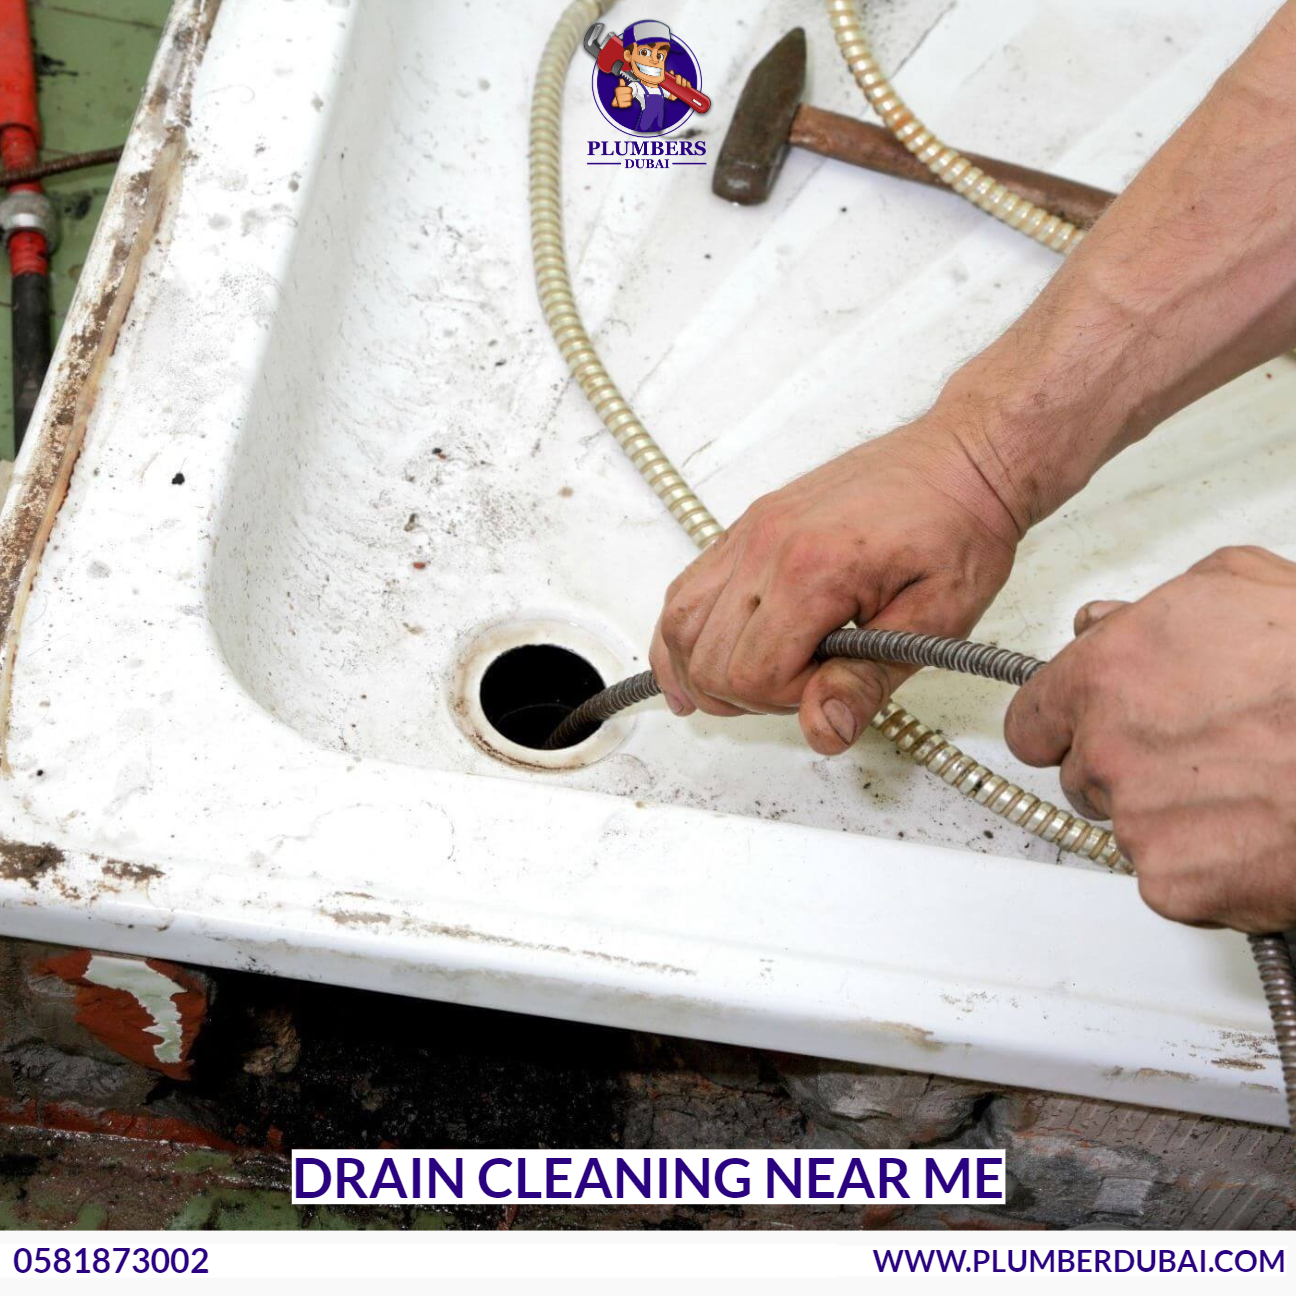 Drain cleaning near me